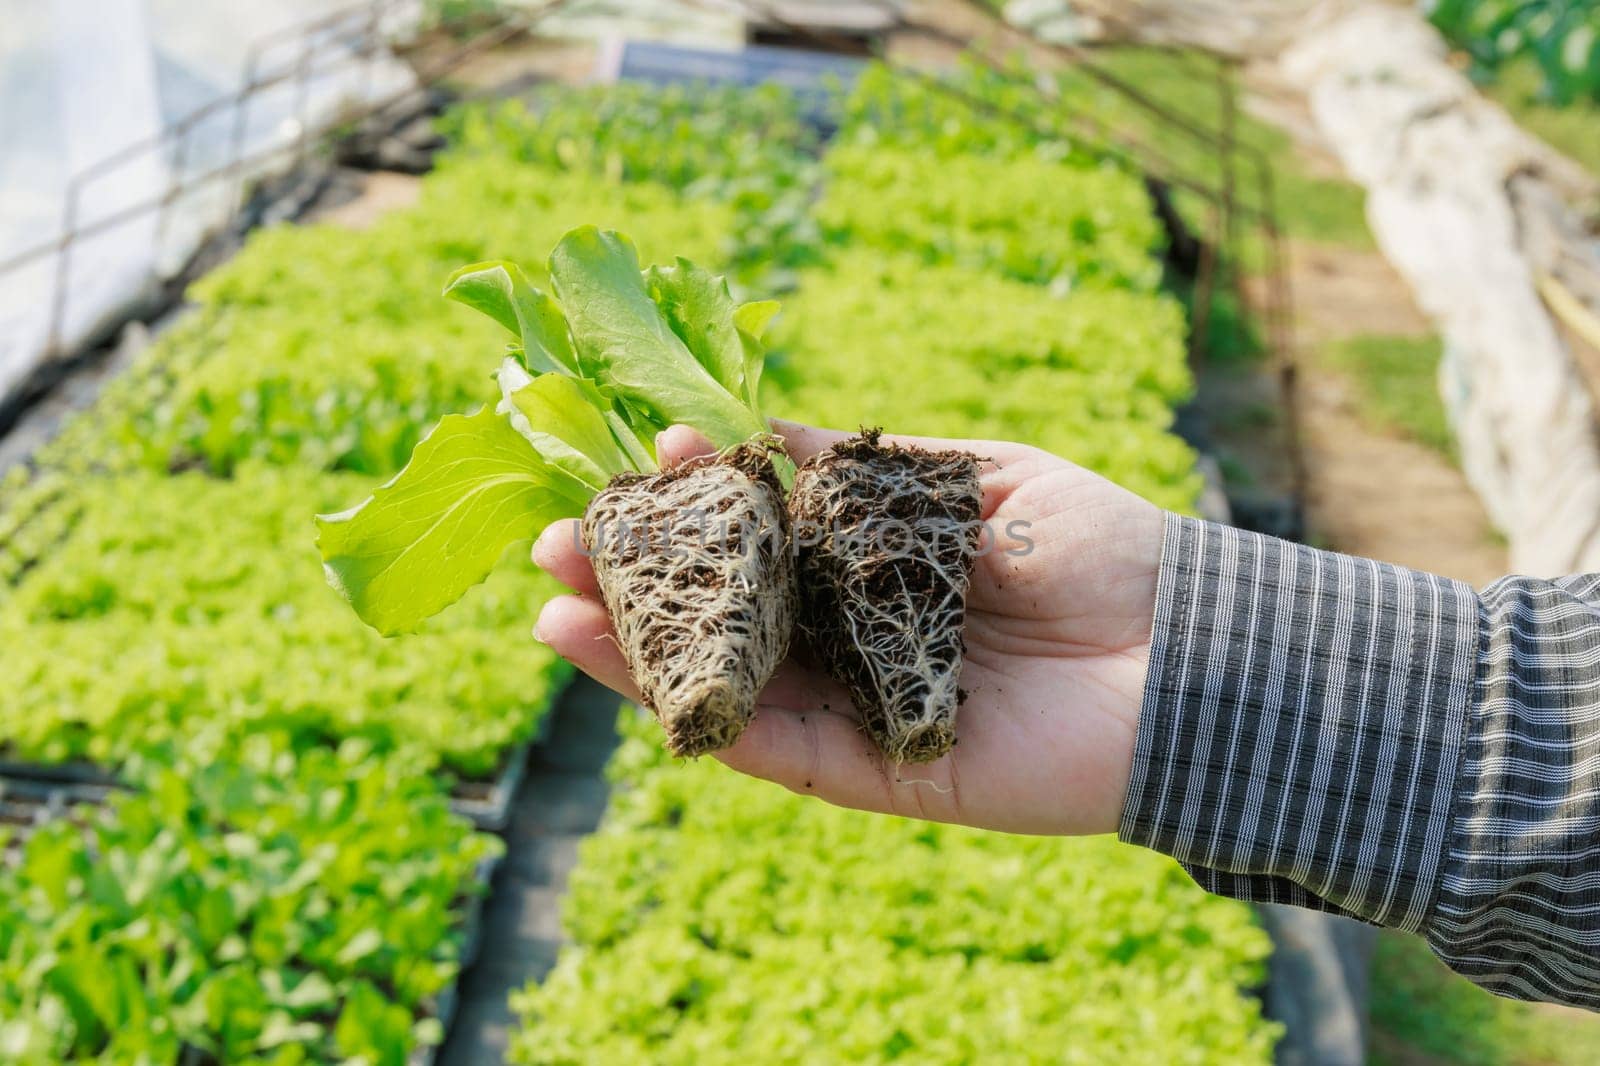 Root system of iceberg lettuce plants establishes strong foundation, anchoring plant and supporting its growth.